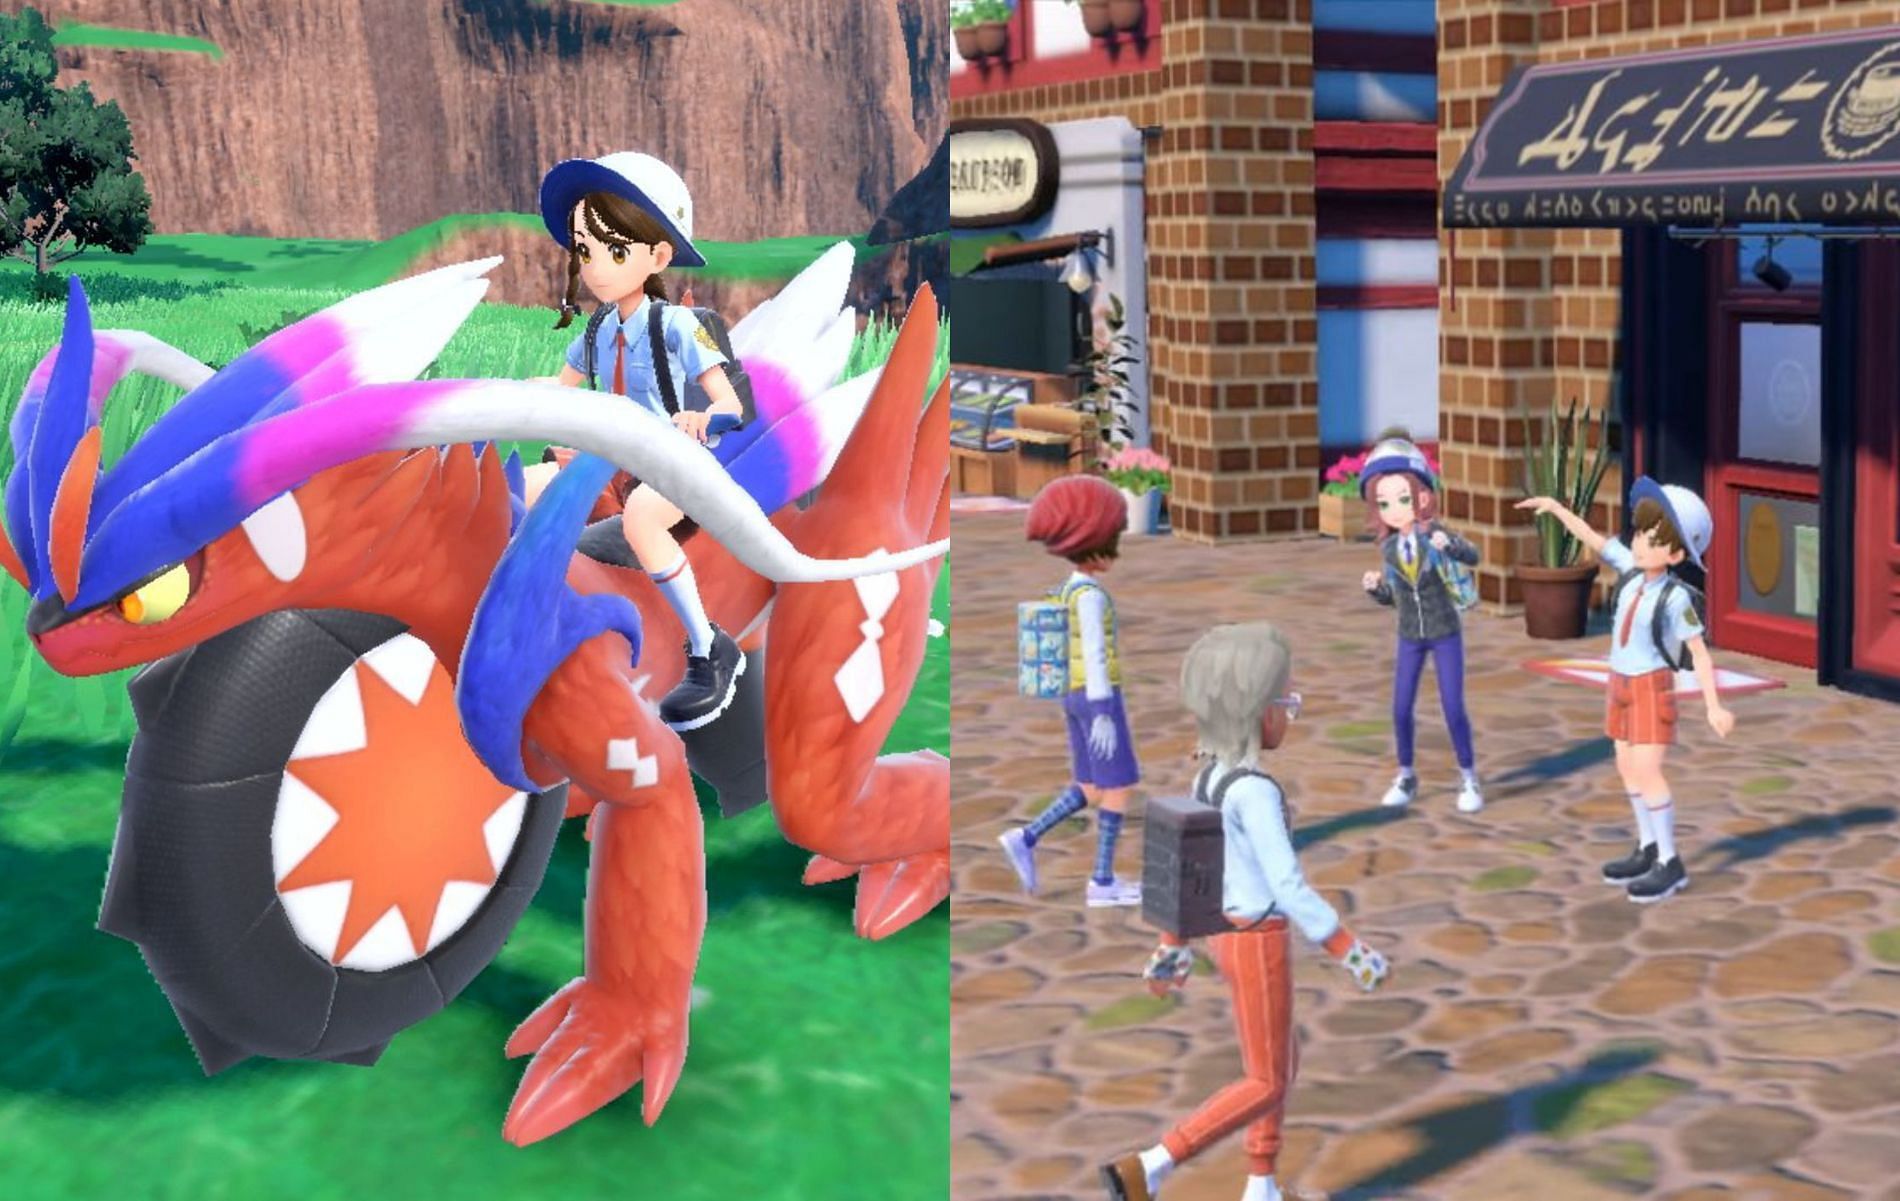 The upcoming open-world RPG may have a les=than-satosfying post-campaign contet if rumors are to be believed (Images via The Pokemon Company)